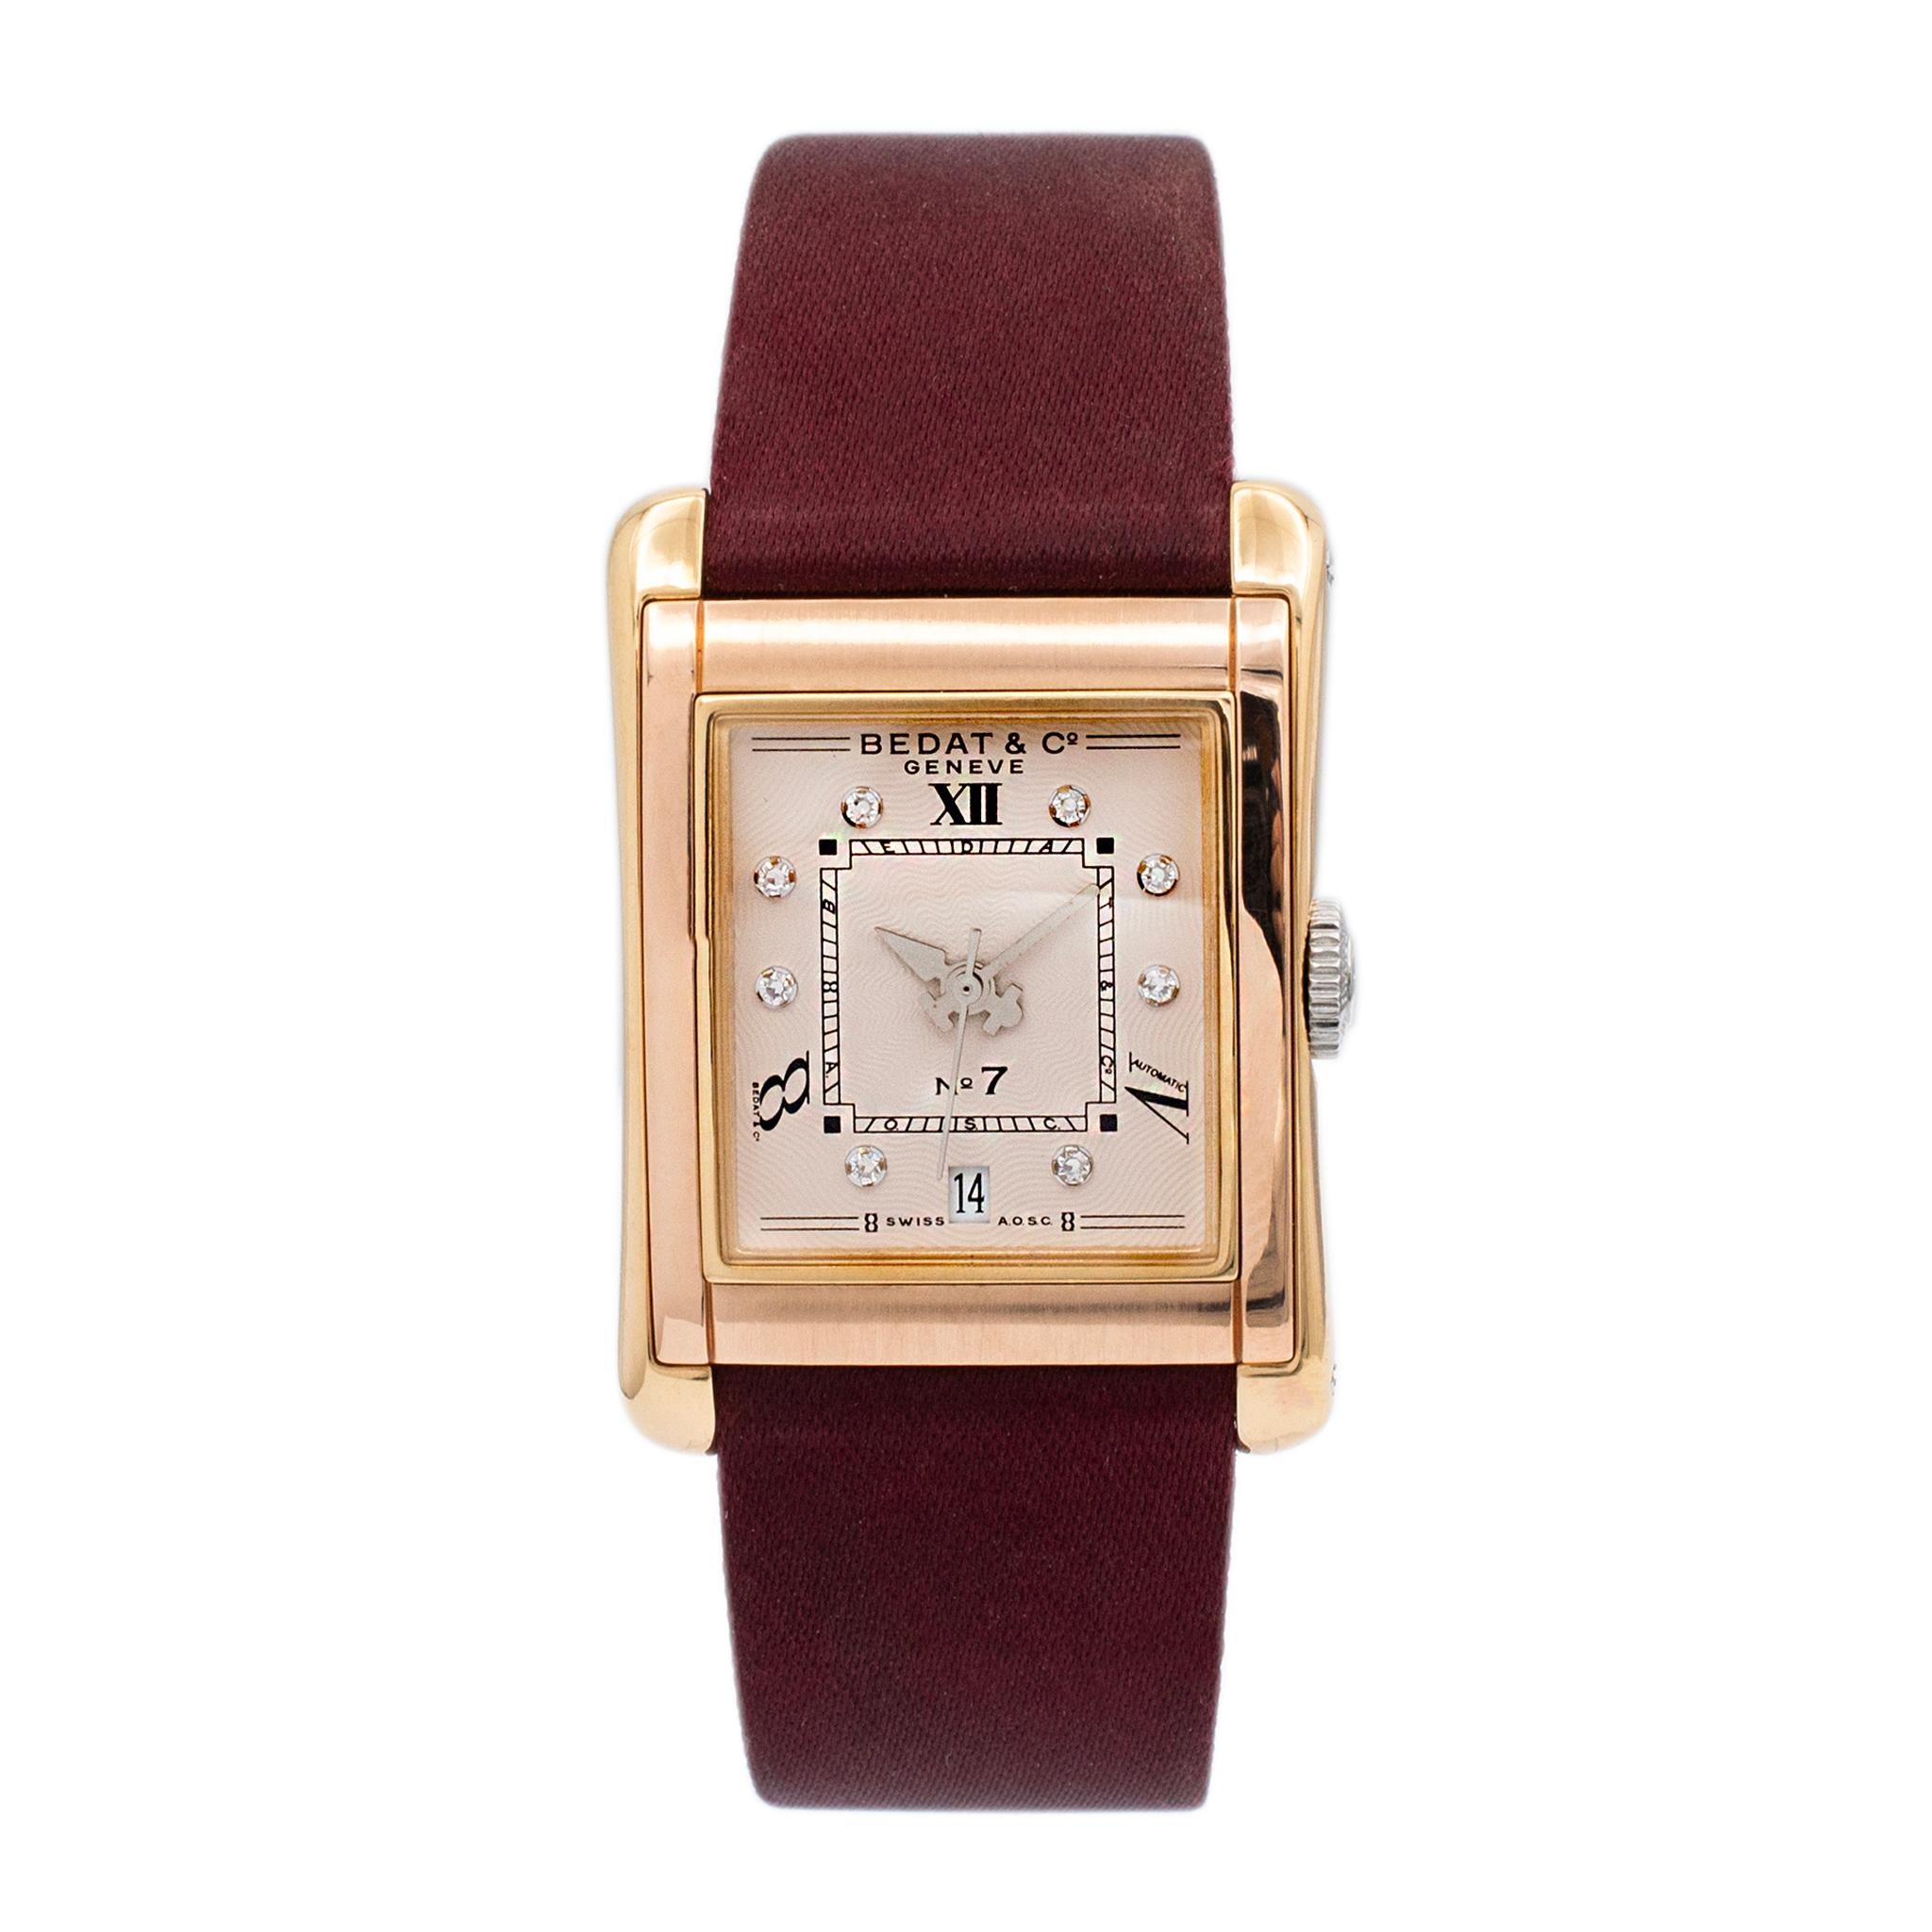 Brand: Bedat & Co.

Gender: Ladies

Metal Type: 18K Yellow Gold & Stainless Steel

Weight: 53.20 grams

Ladies stainless steel and 18K yellow gold Bedat & Co. diamond Swiss made watch. Engraved with 